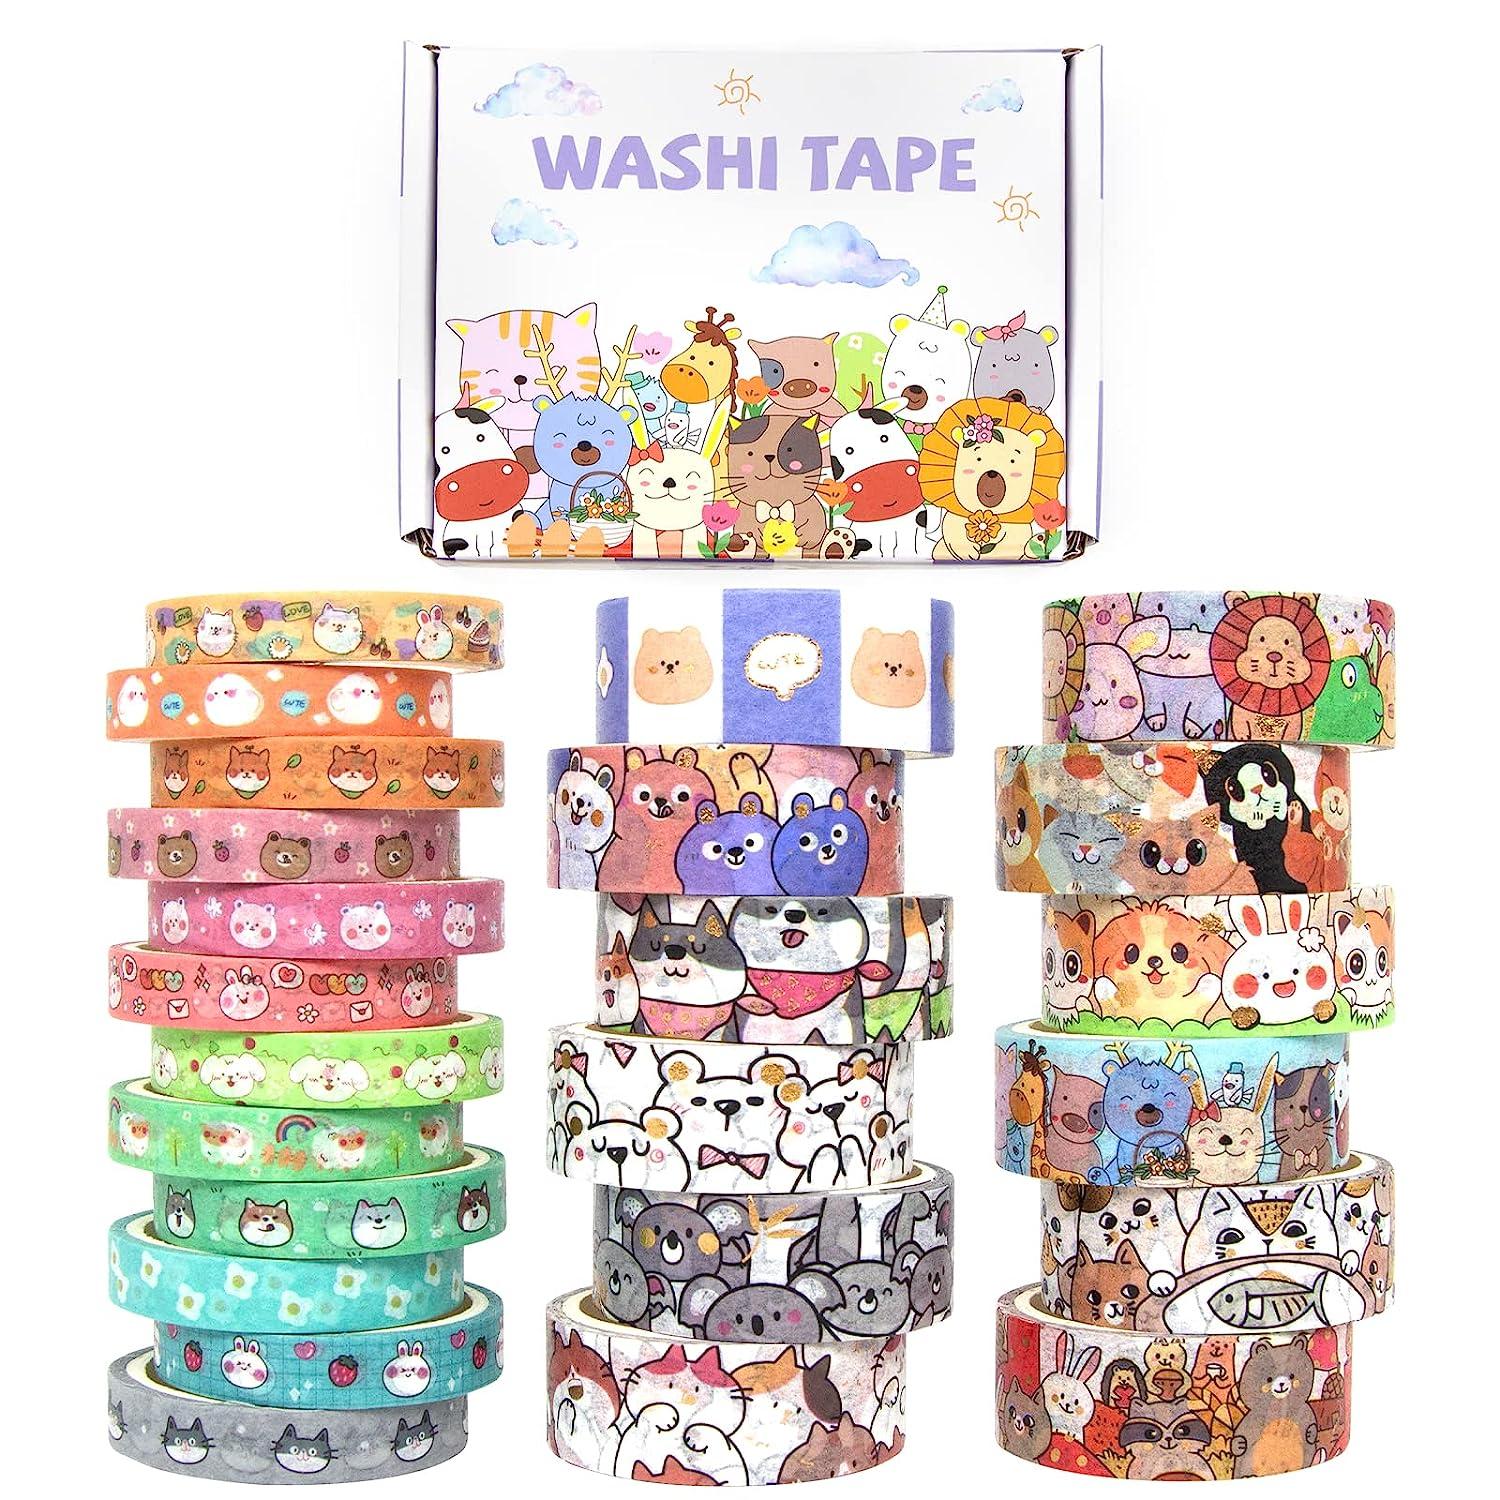  Kawaii Cute Washi Tape Set, Japanese Decorative Masking Tapes  Stickers for Journalings, Scrapbooking and DIY Crafts, Aesthetic School  Supplies Stationary for Back to School